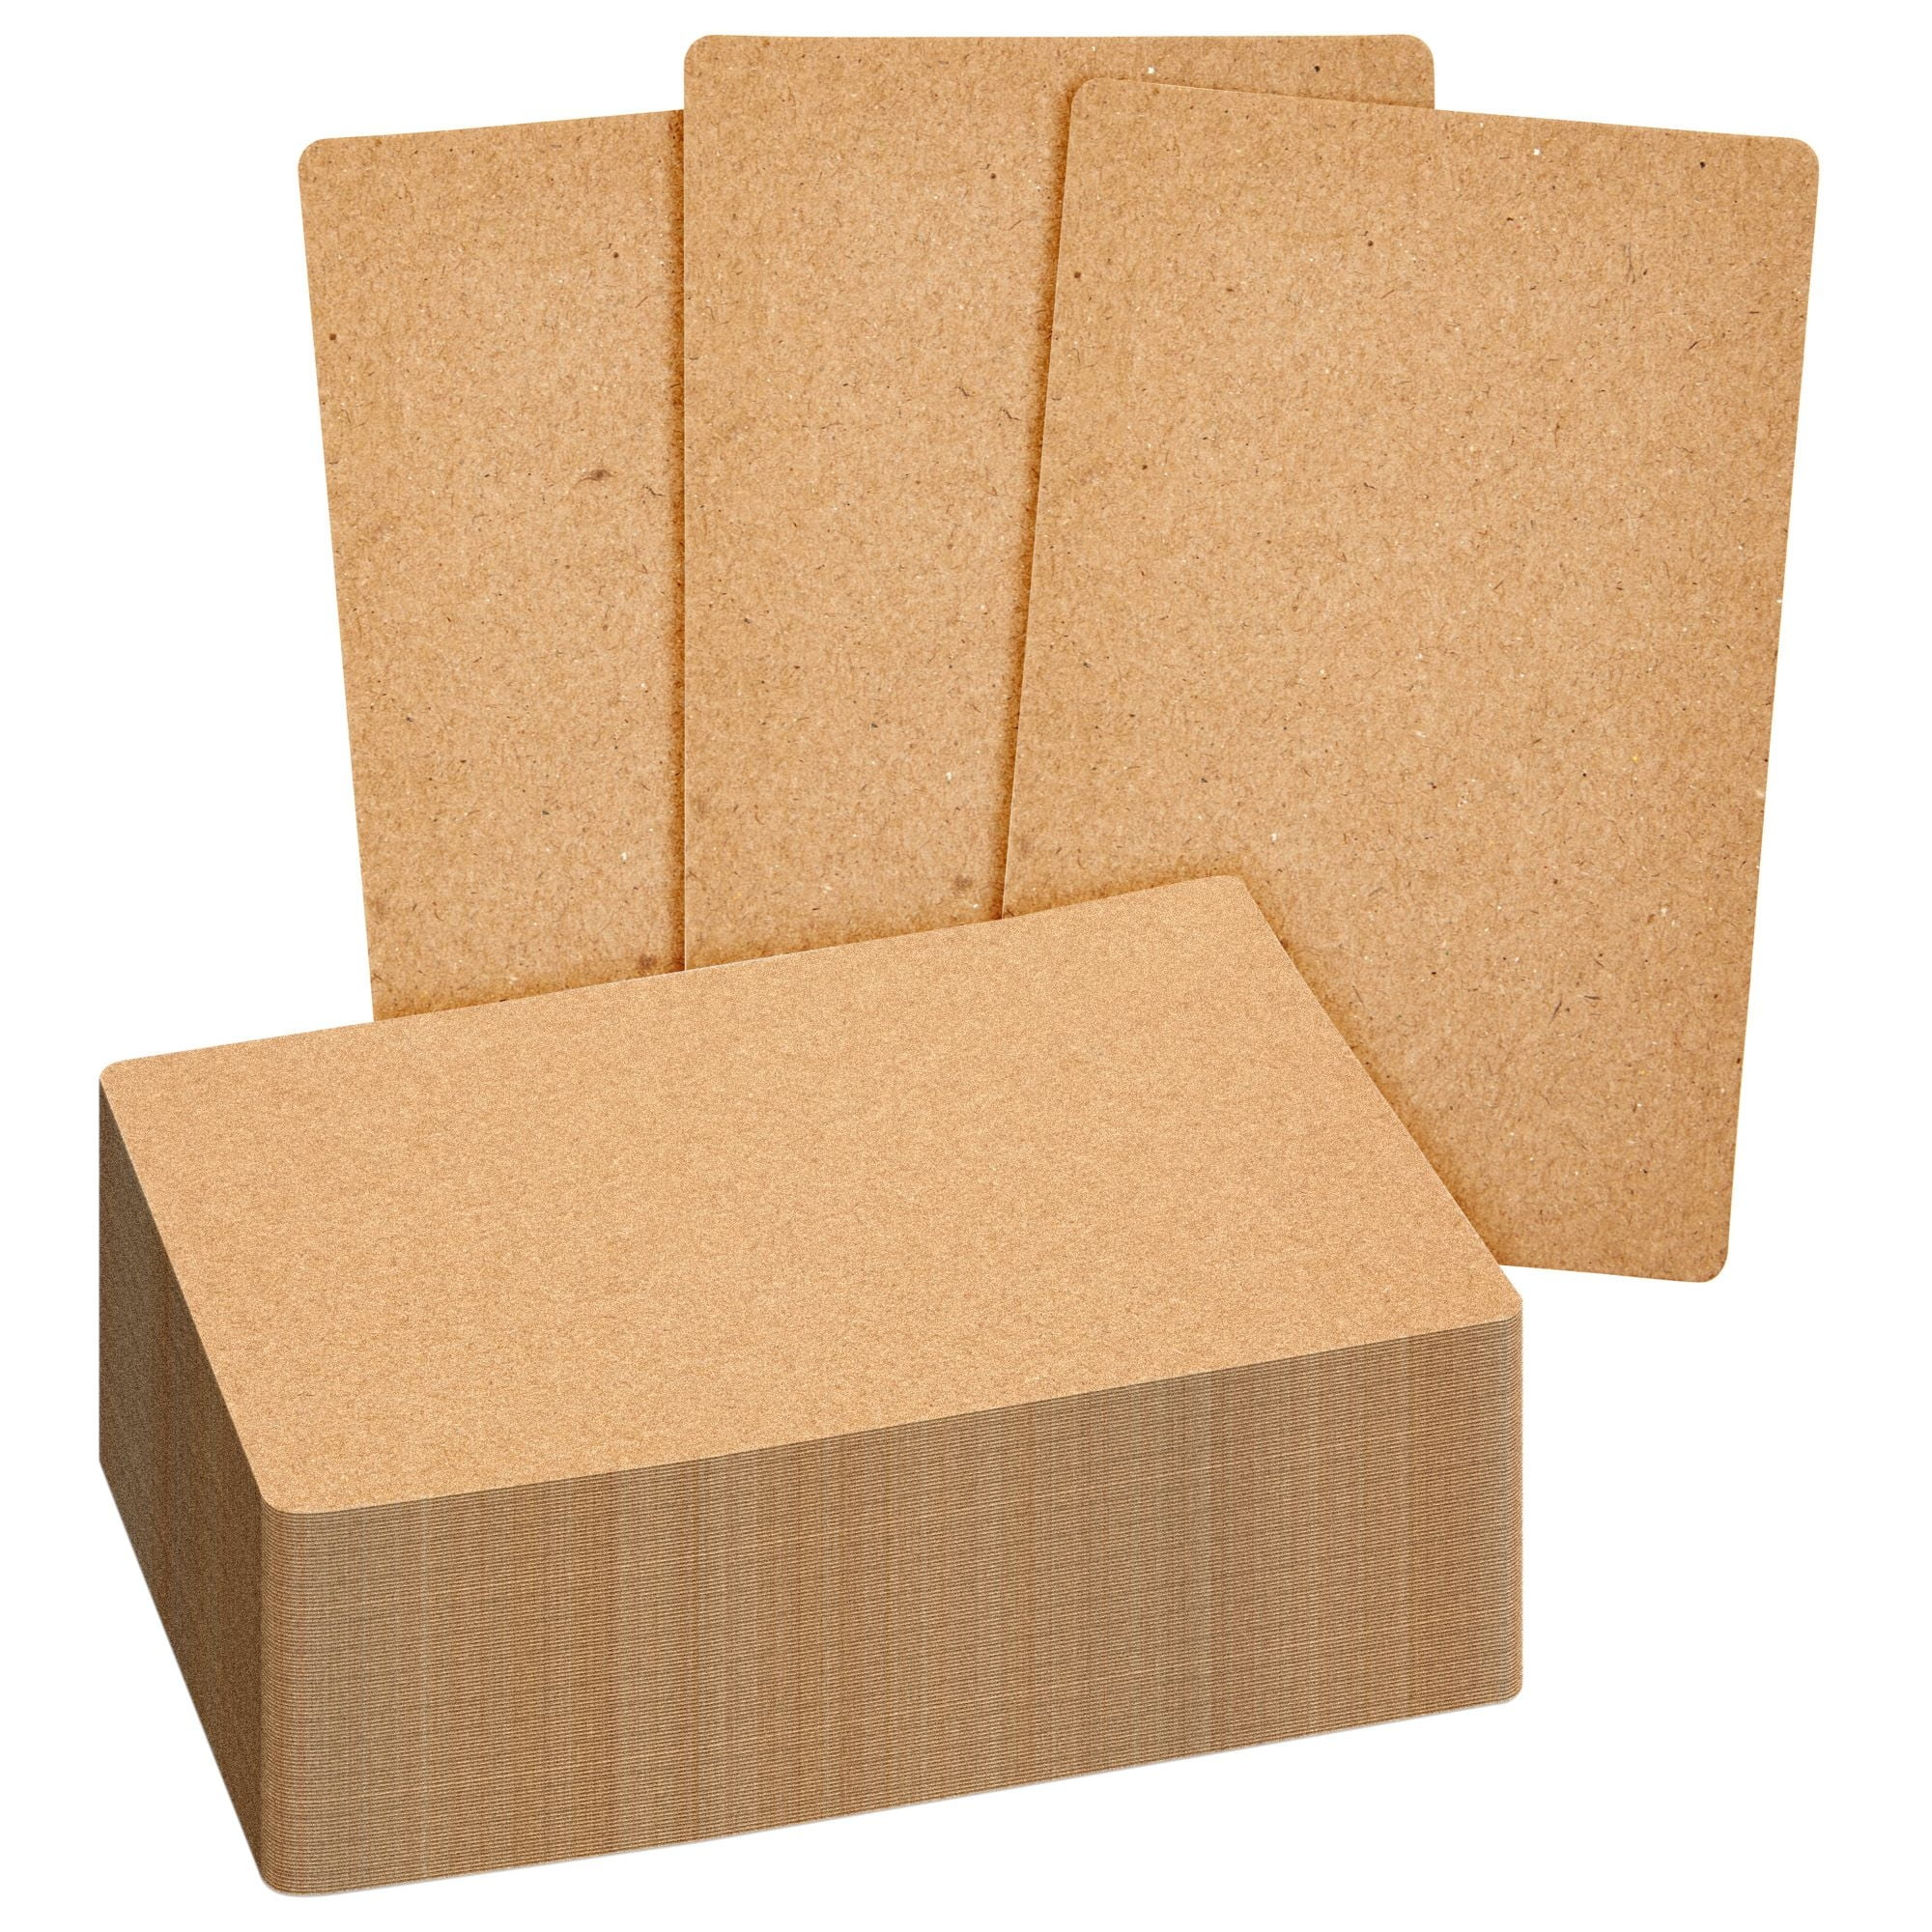 Index Cards  Discount Note Cards at Bulk Office Supply